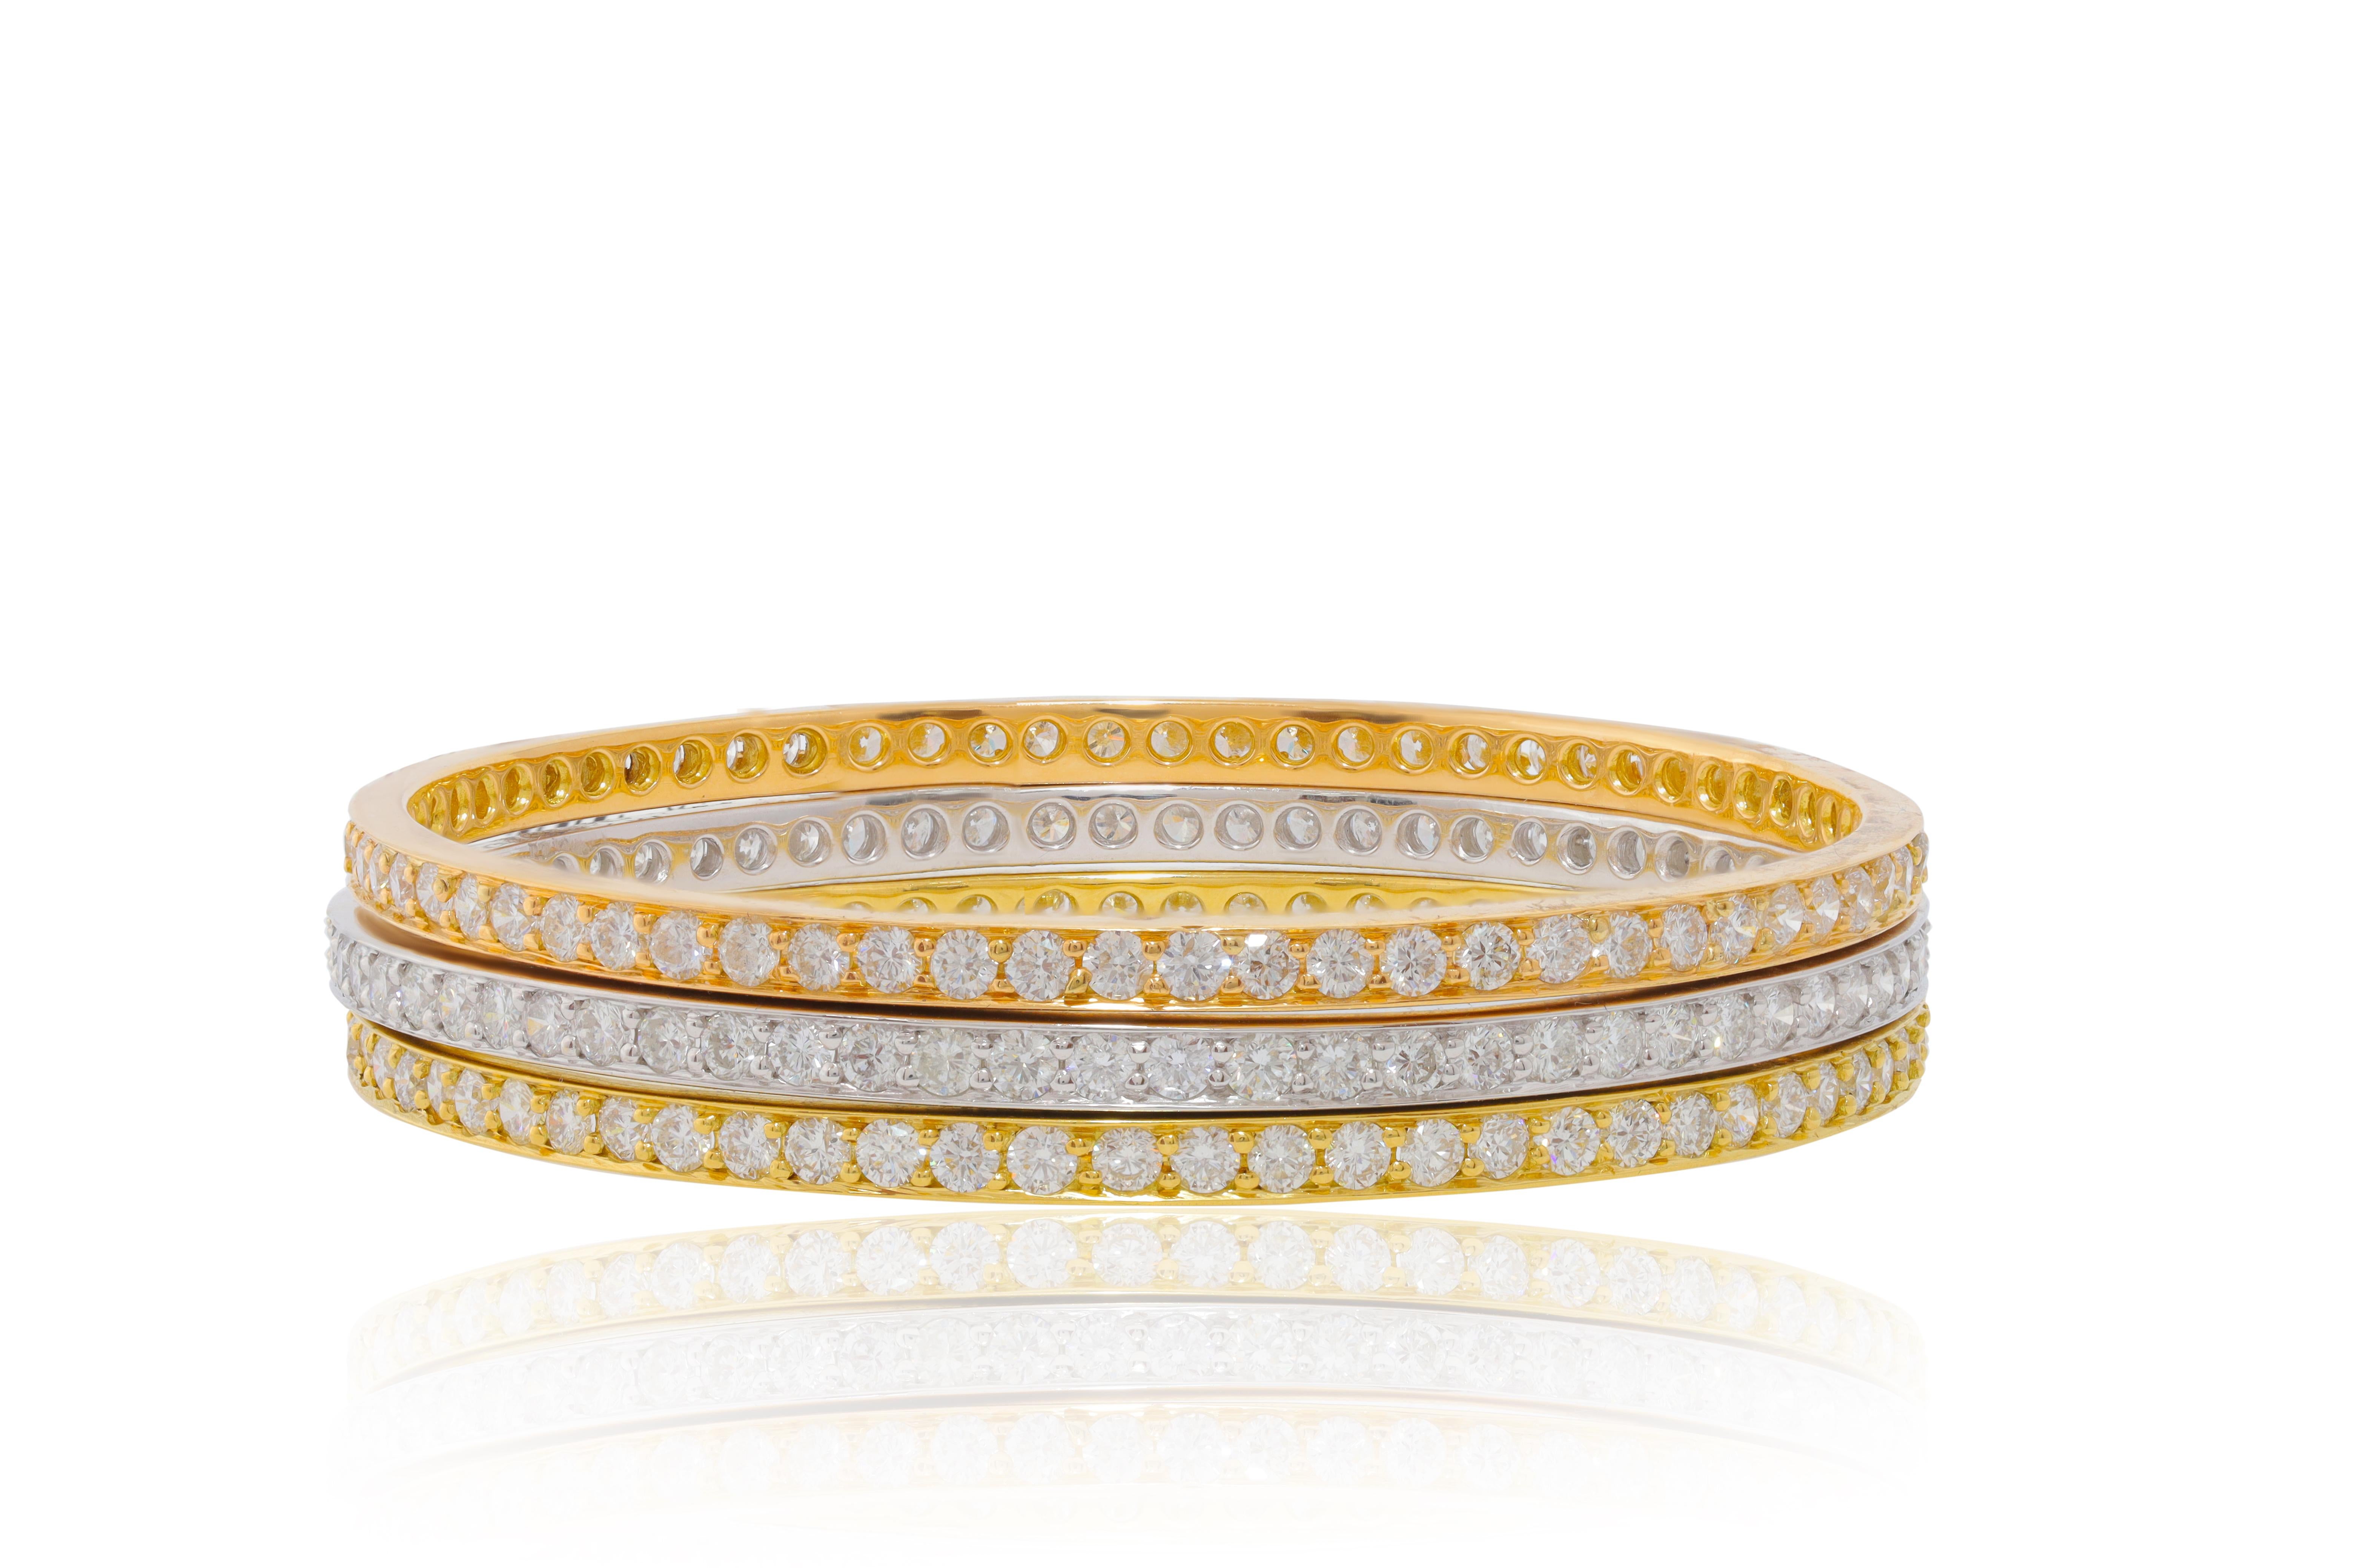 Diana M. Tri-color set of white, yellow, and rose gold bangles adorned with 23ct In New Condition For Sale In New York, NY